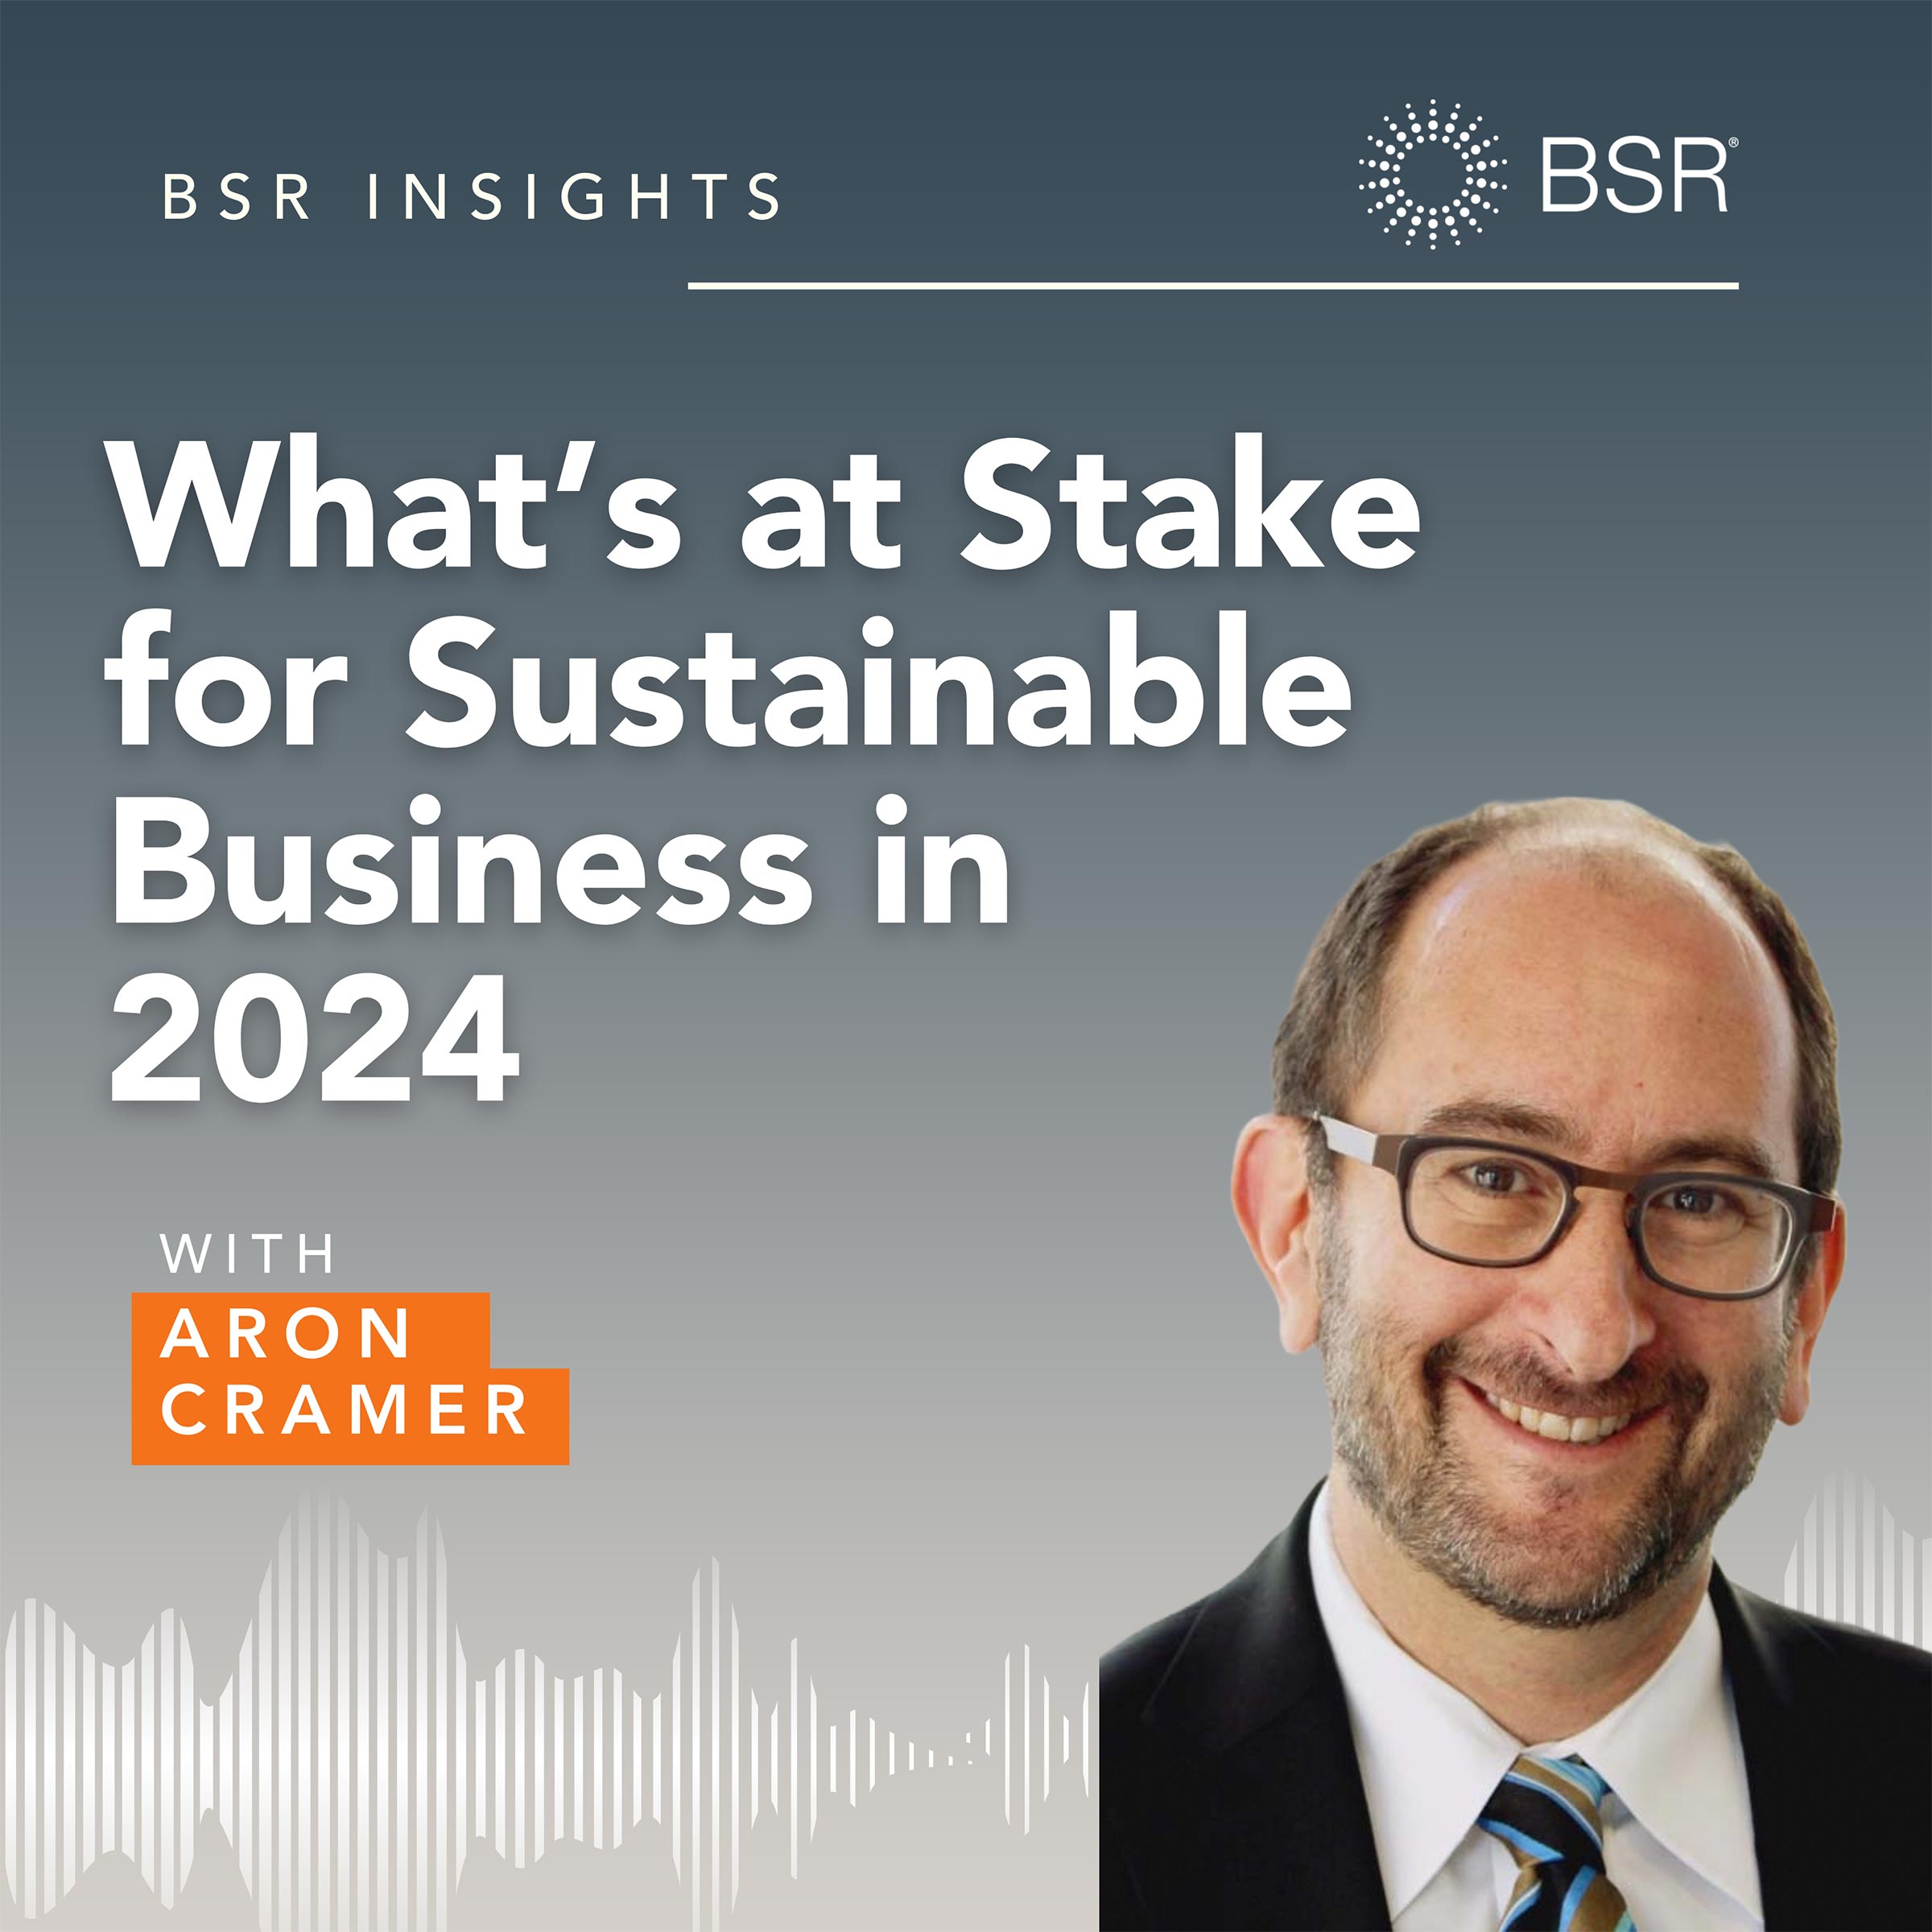 What’s at Stake for Sustainable Business in 2024 thumbnail image